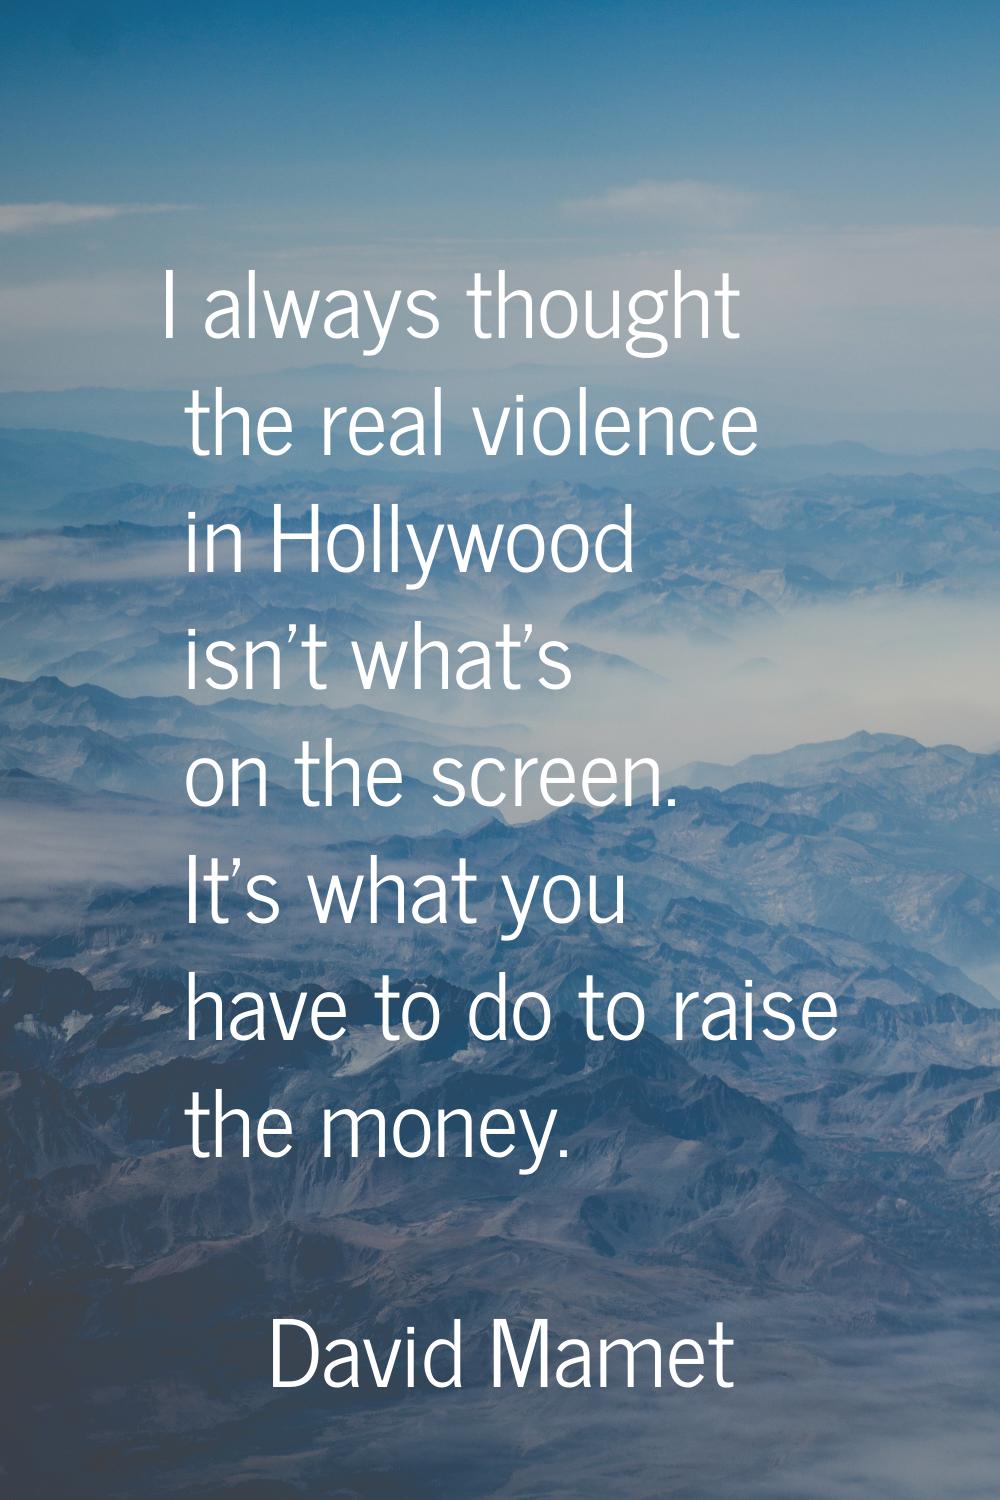 I always thought the real violence in Hollywood isn't what's on the screen. It's what you have to d